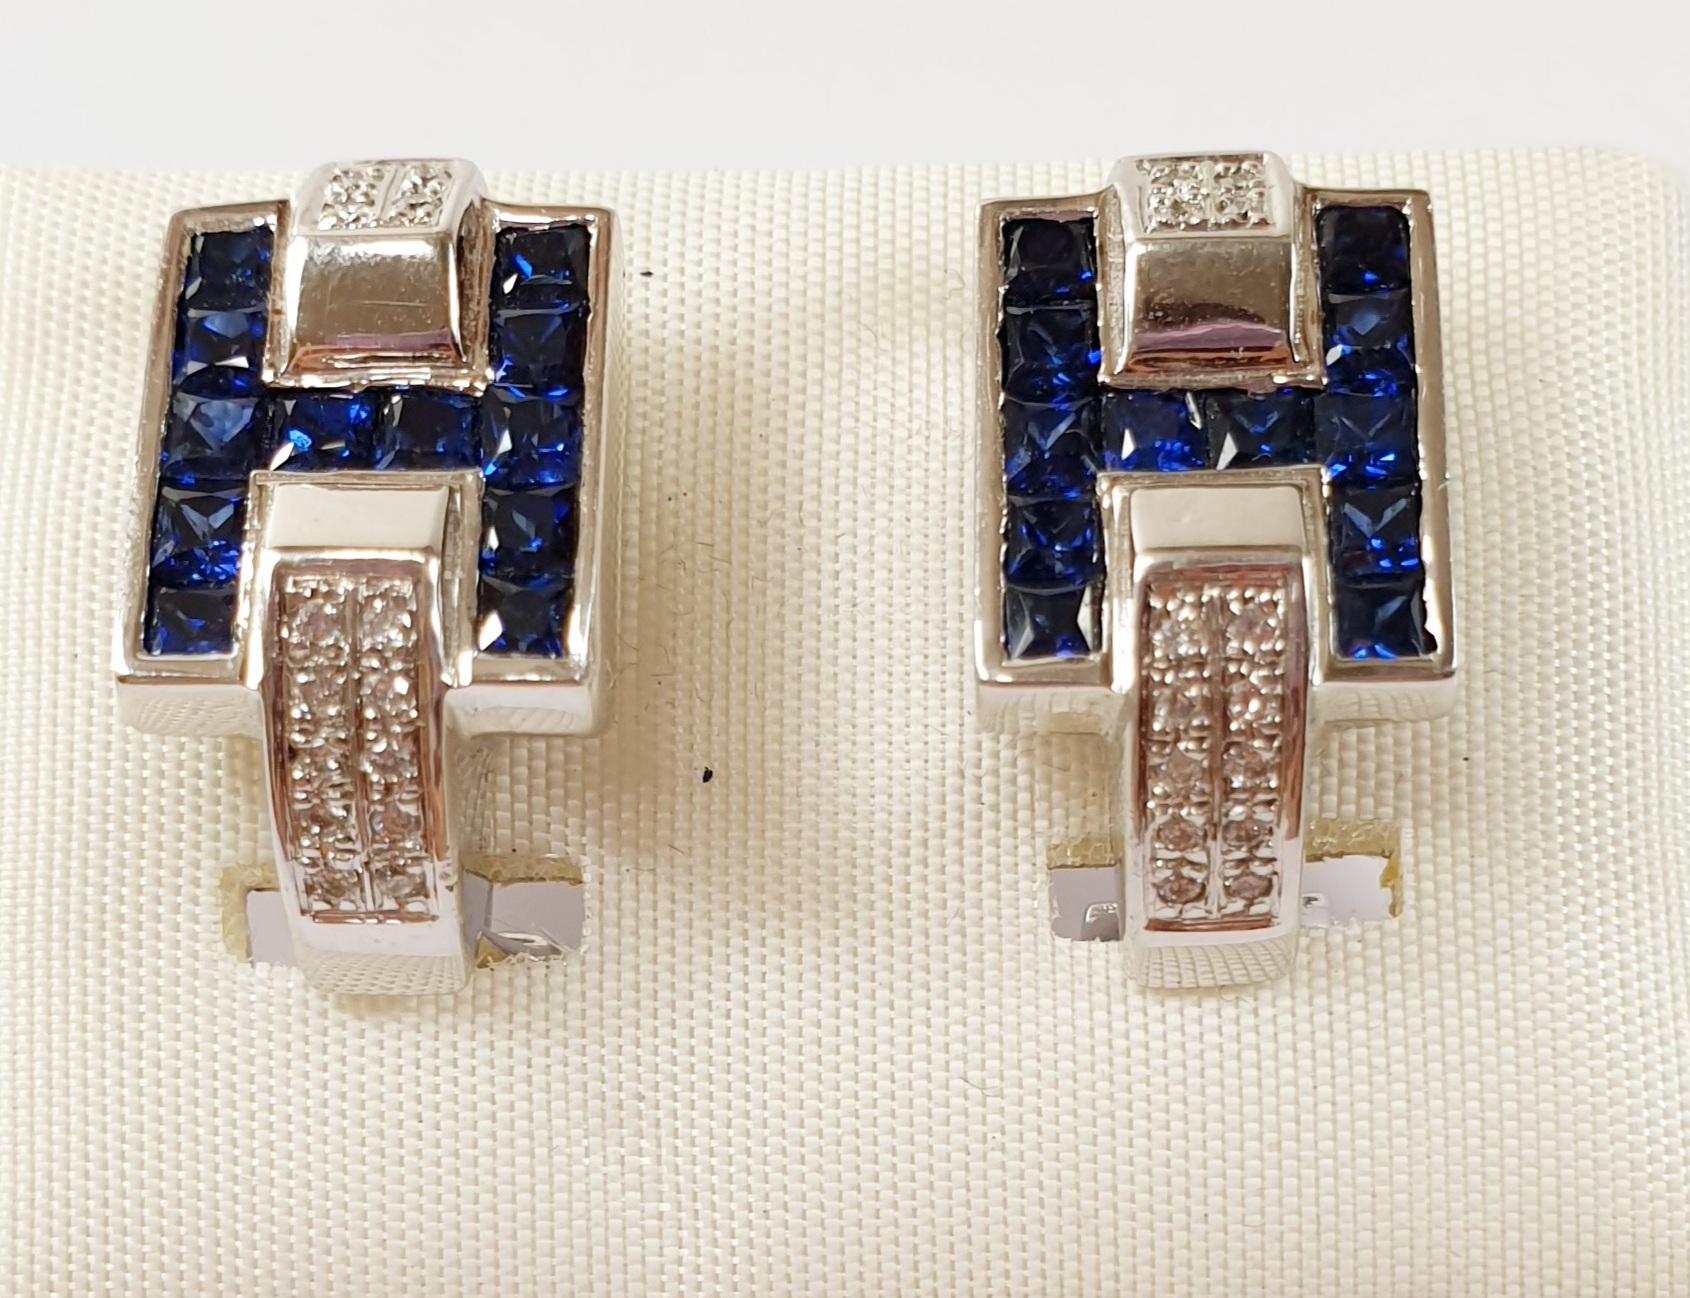 Diamond and Sapphire Hoops Earrings in 18 Karat White Gold with a H Hermes Horseshoe design
These pair of 18k white gold hoops earrings weight 6,2 grams each and have o.28ct of diamonds 
Please note that carat weights may slightly vary as each Irama